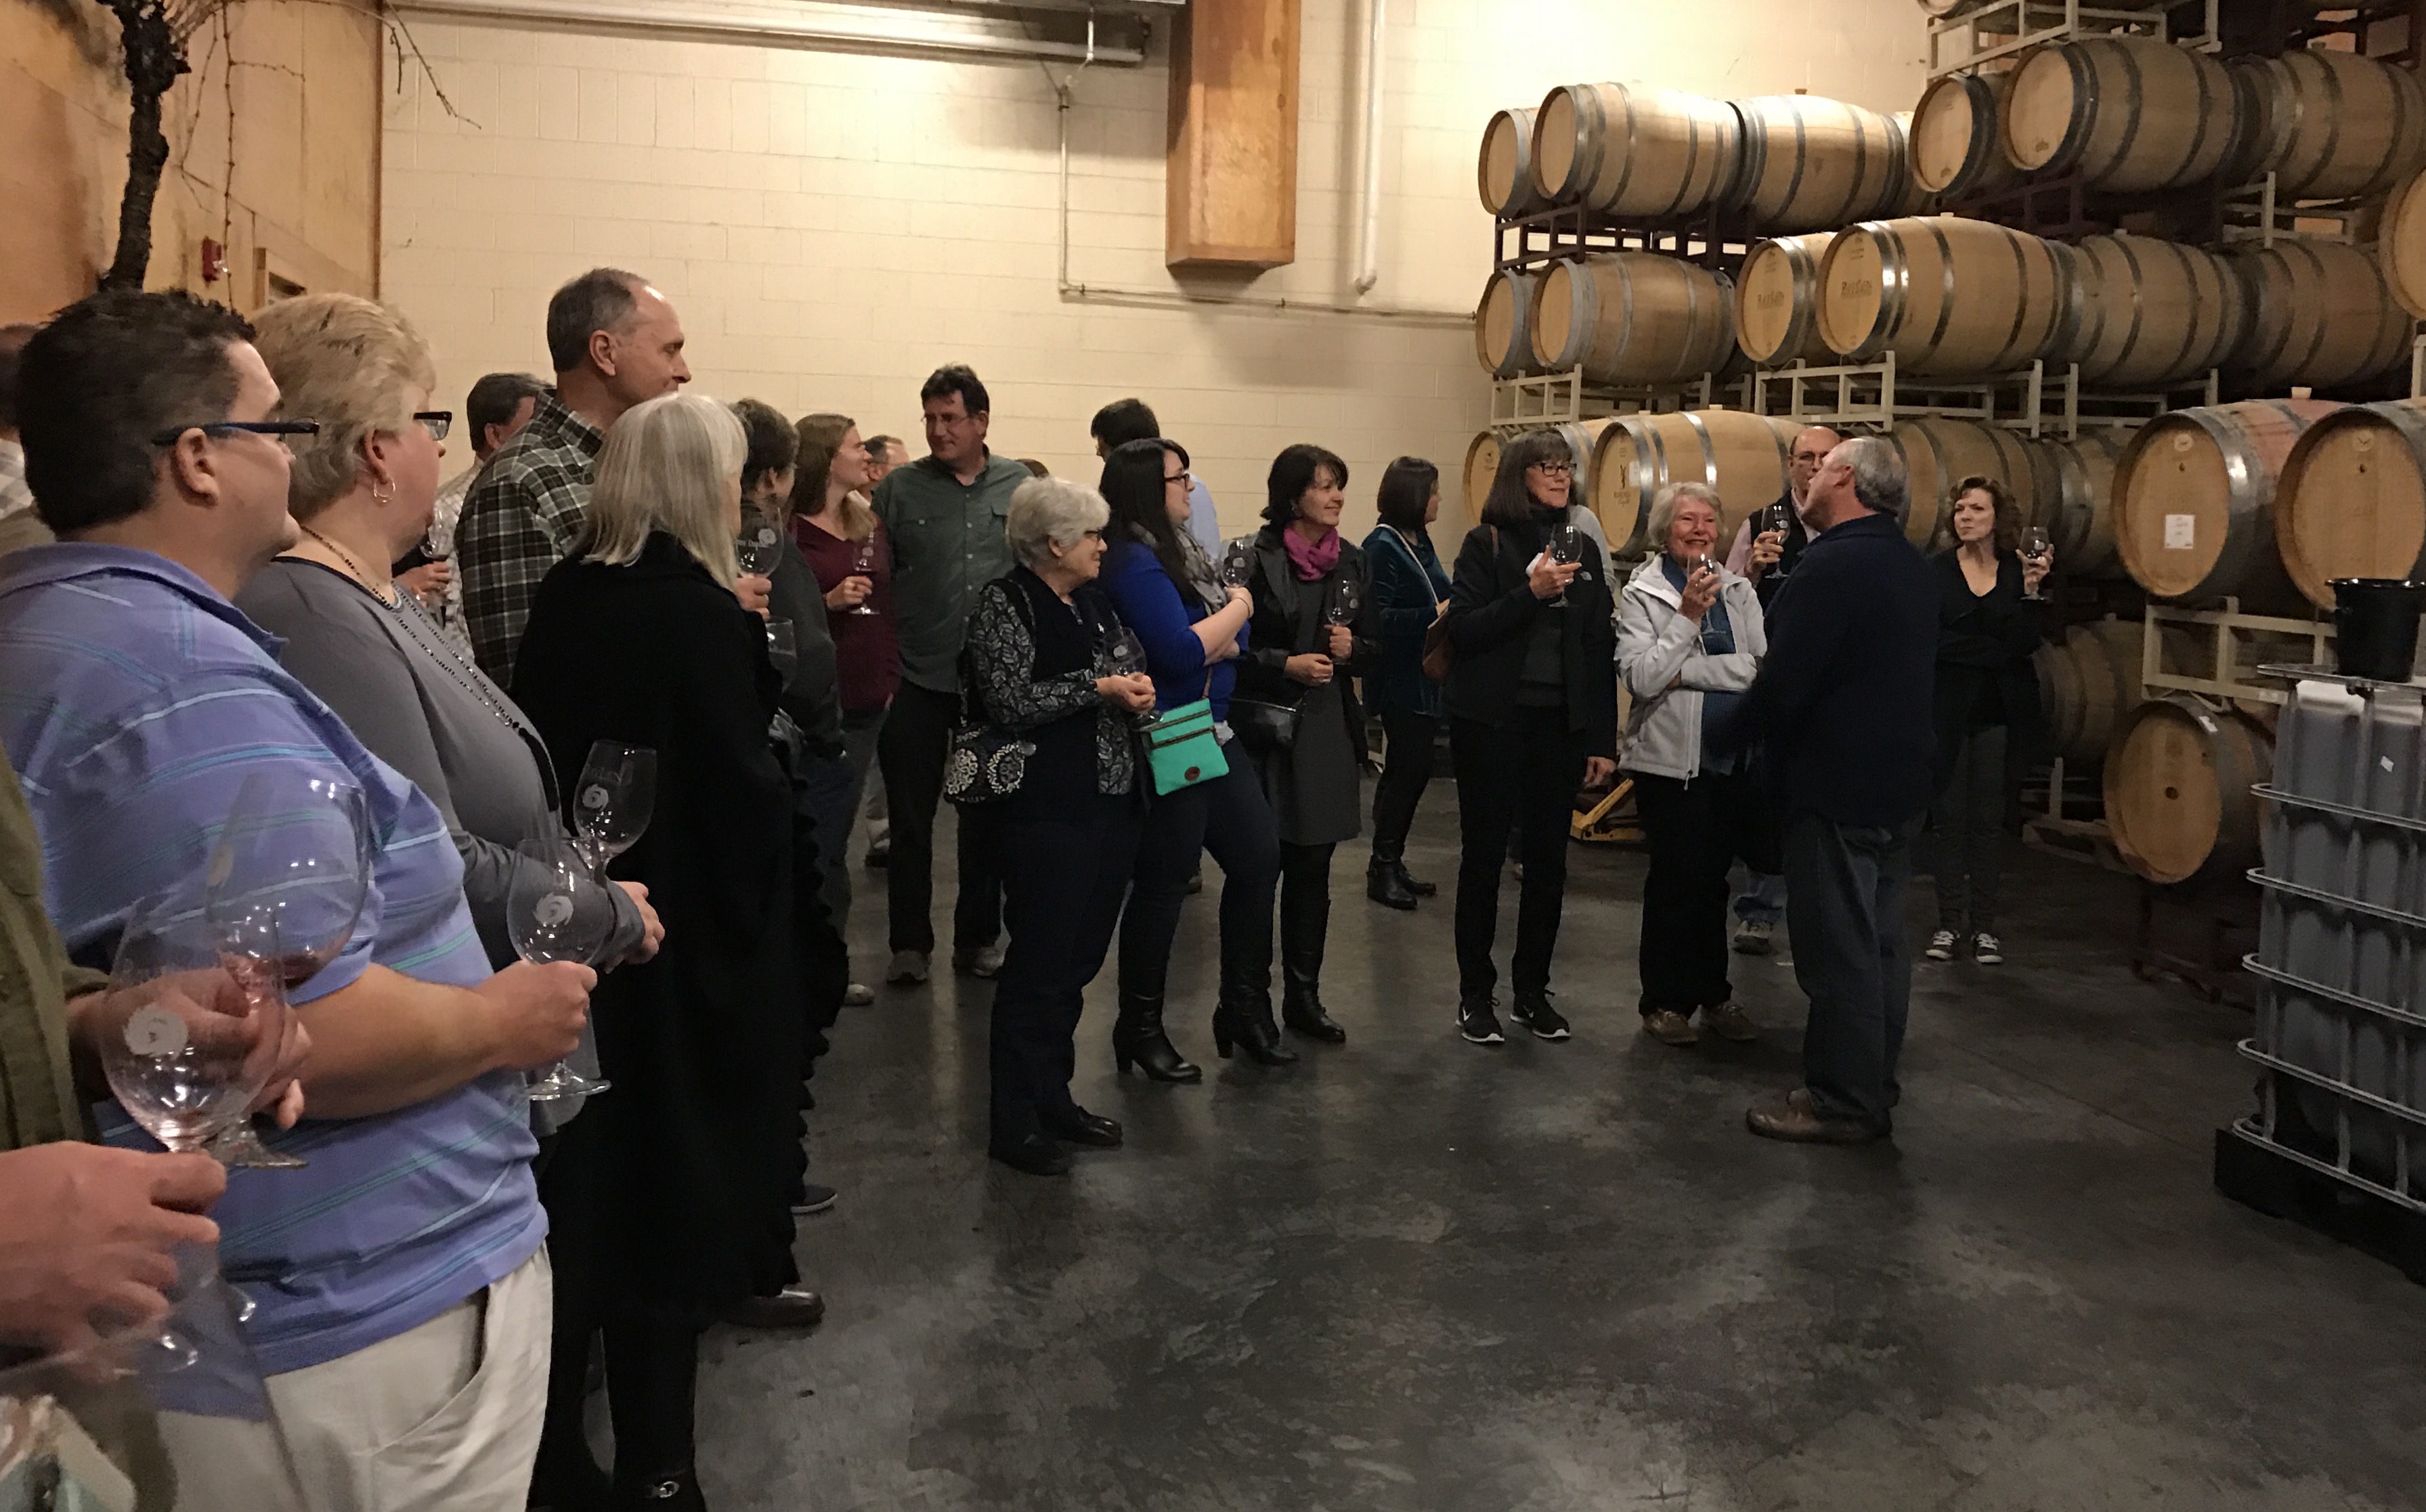 An Evening with the Winemaker: a Barrel Tasting at RayLen Vineyards